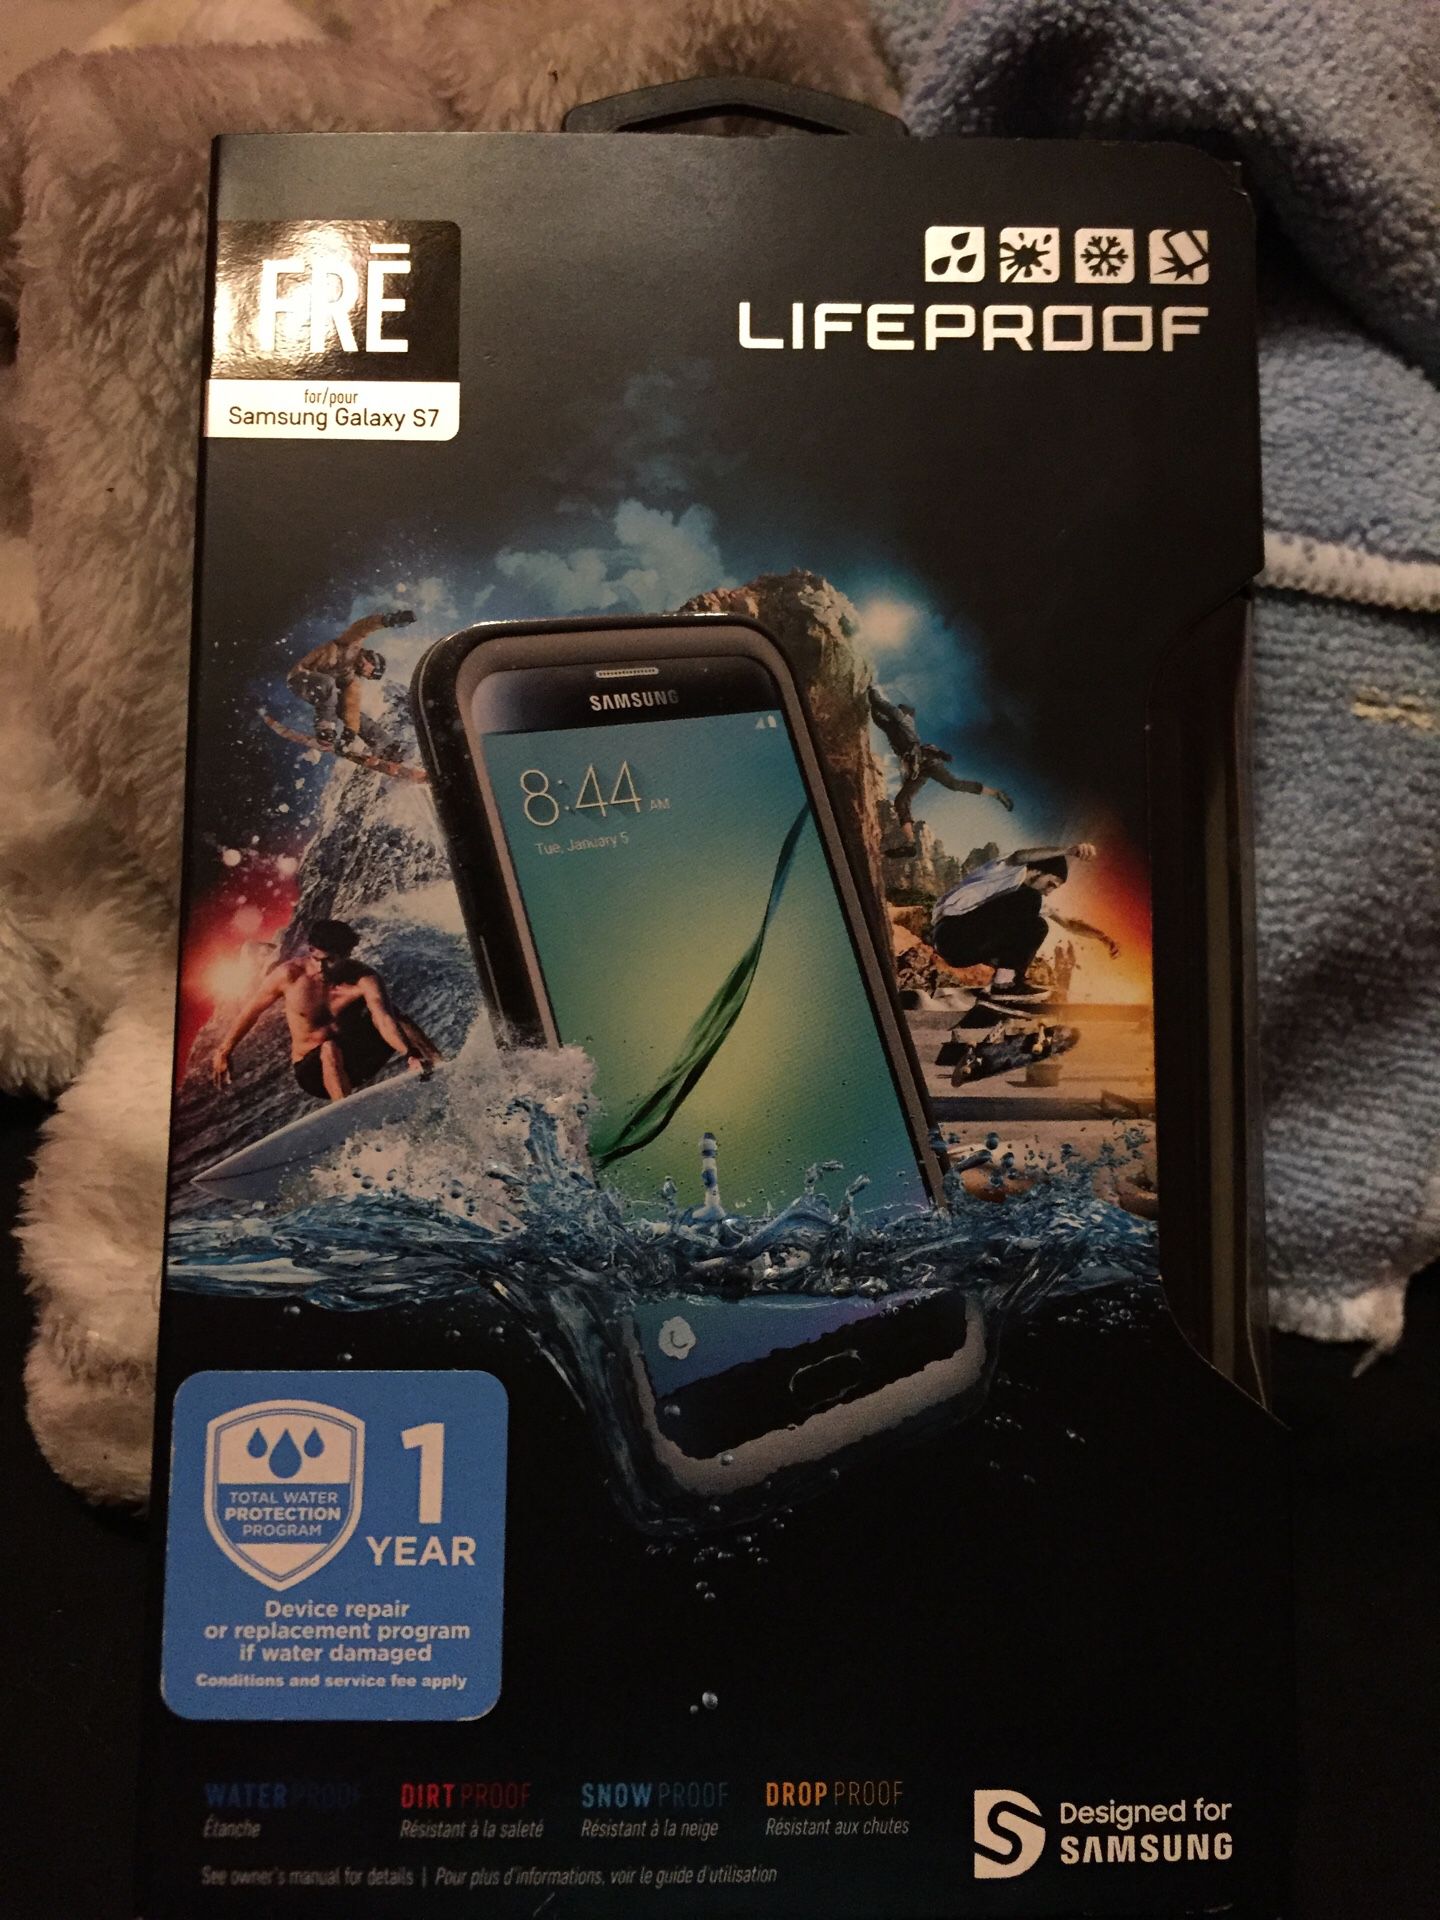 Samsung Galaxy S 7 life proof protective case new in box